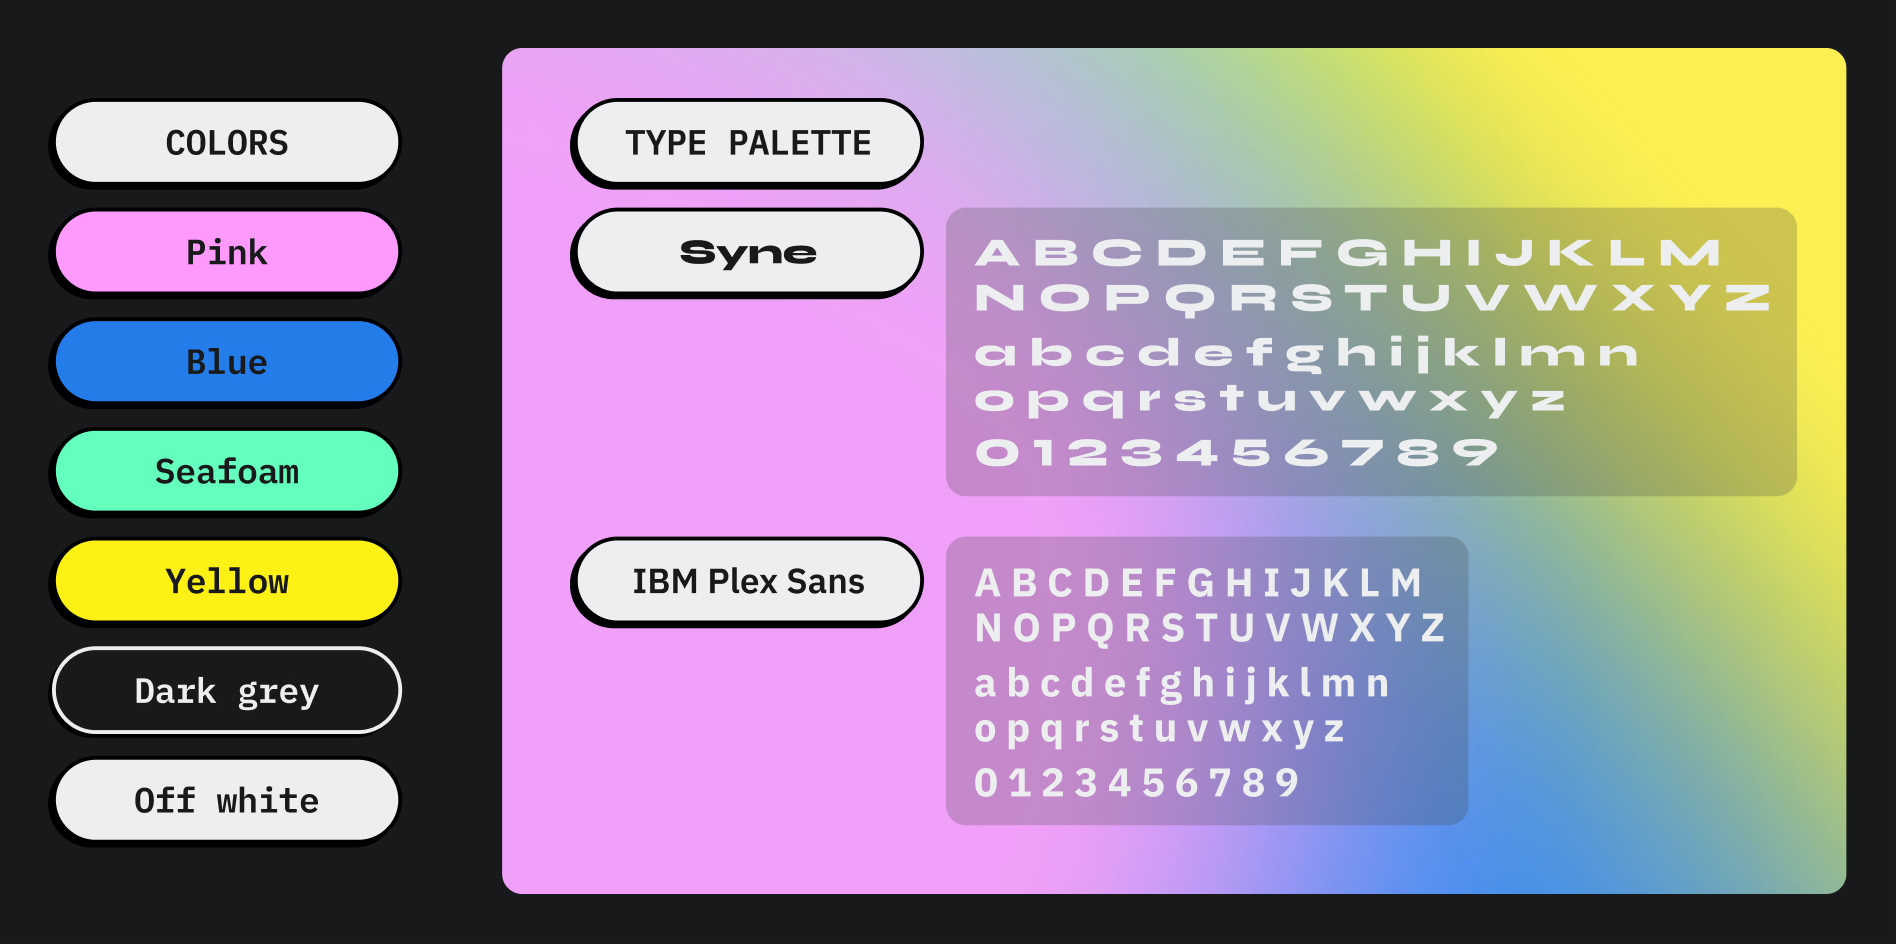 Color and type palette